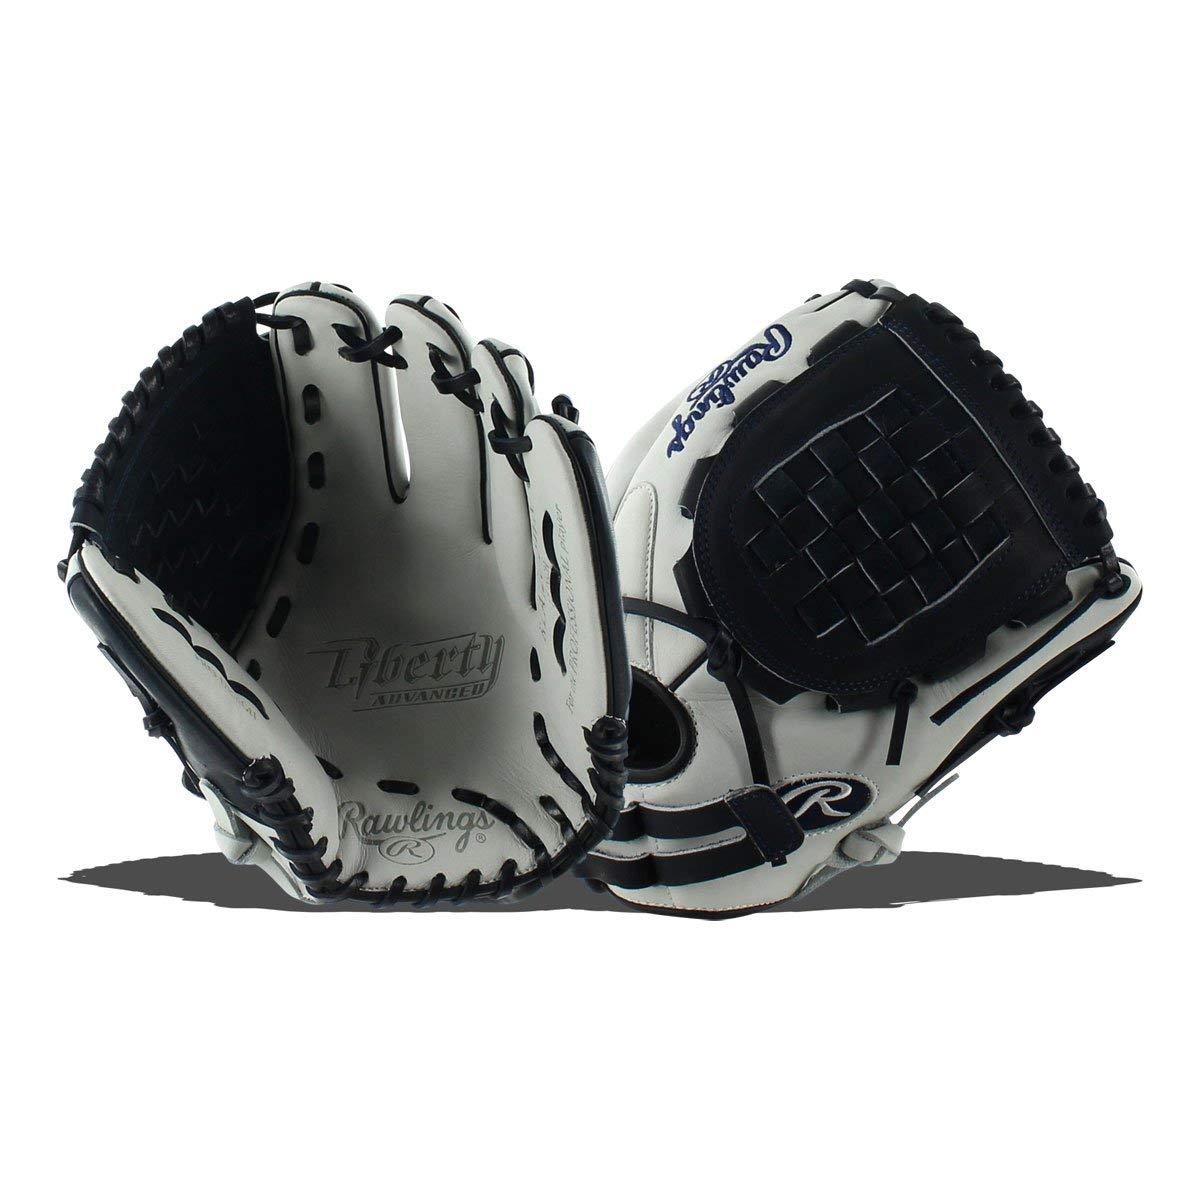 Limited Edition Color Series - White/Navy Colorway 12 Inch Women's Model Basket Web Break-In: 80% Factory / 20% Player Custom Fit, Adjustable, Non-Slip Pull Strap Back